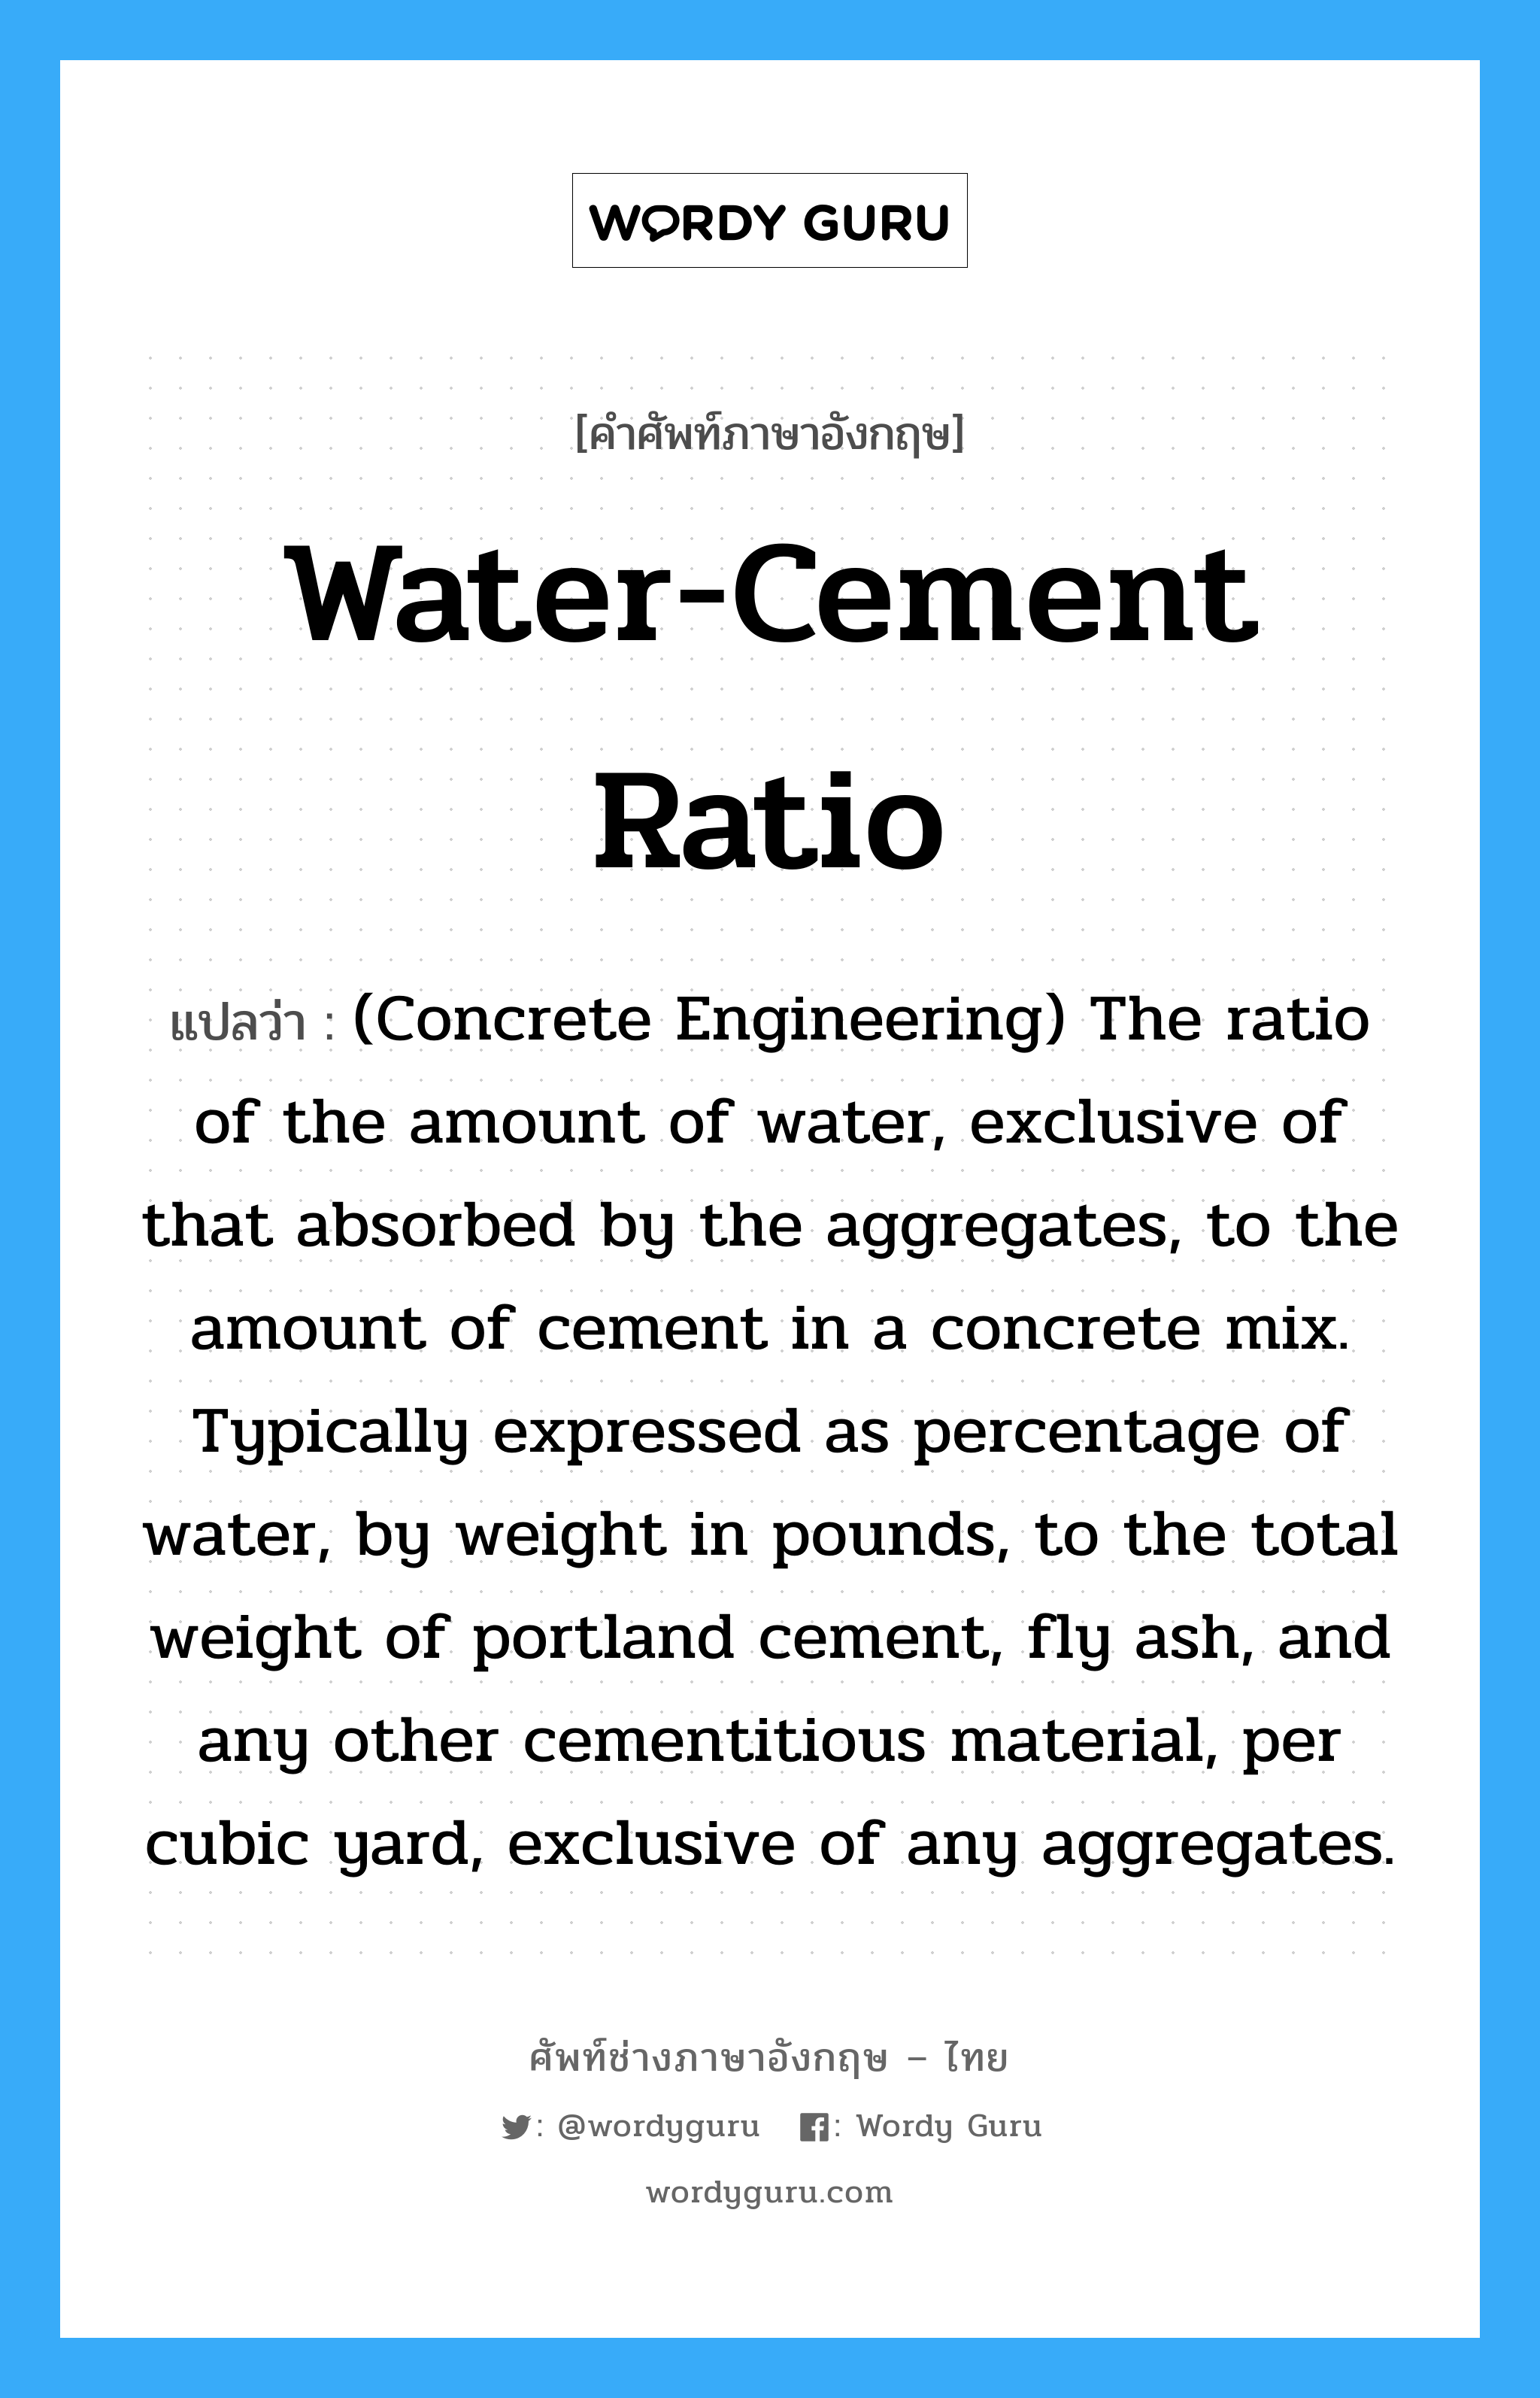 Water-Cement Ratio แปลว่า?, คำศัพท์ช่างภาษาอังกฤษ - ไทย Water-Cement Ratio คำศัพท์ภาษาอังกฤษ Water-Cement Ratio แปลว่า (Concrete Engineering) The ratio of the amount of water, exclusive of that absorbed by the aggregates, to the amount of cement in a concrete mix. Typically expressed as percentage of water, by weight in pounds, to the total weight of portland cement, fly ash, and any other cementitious material, per cubic yard, exclusive of any aggregates.